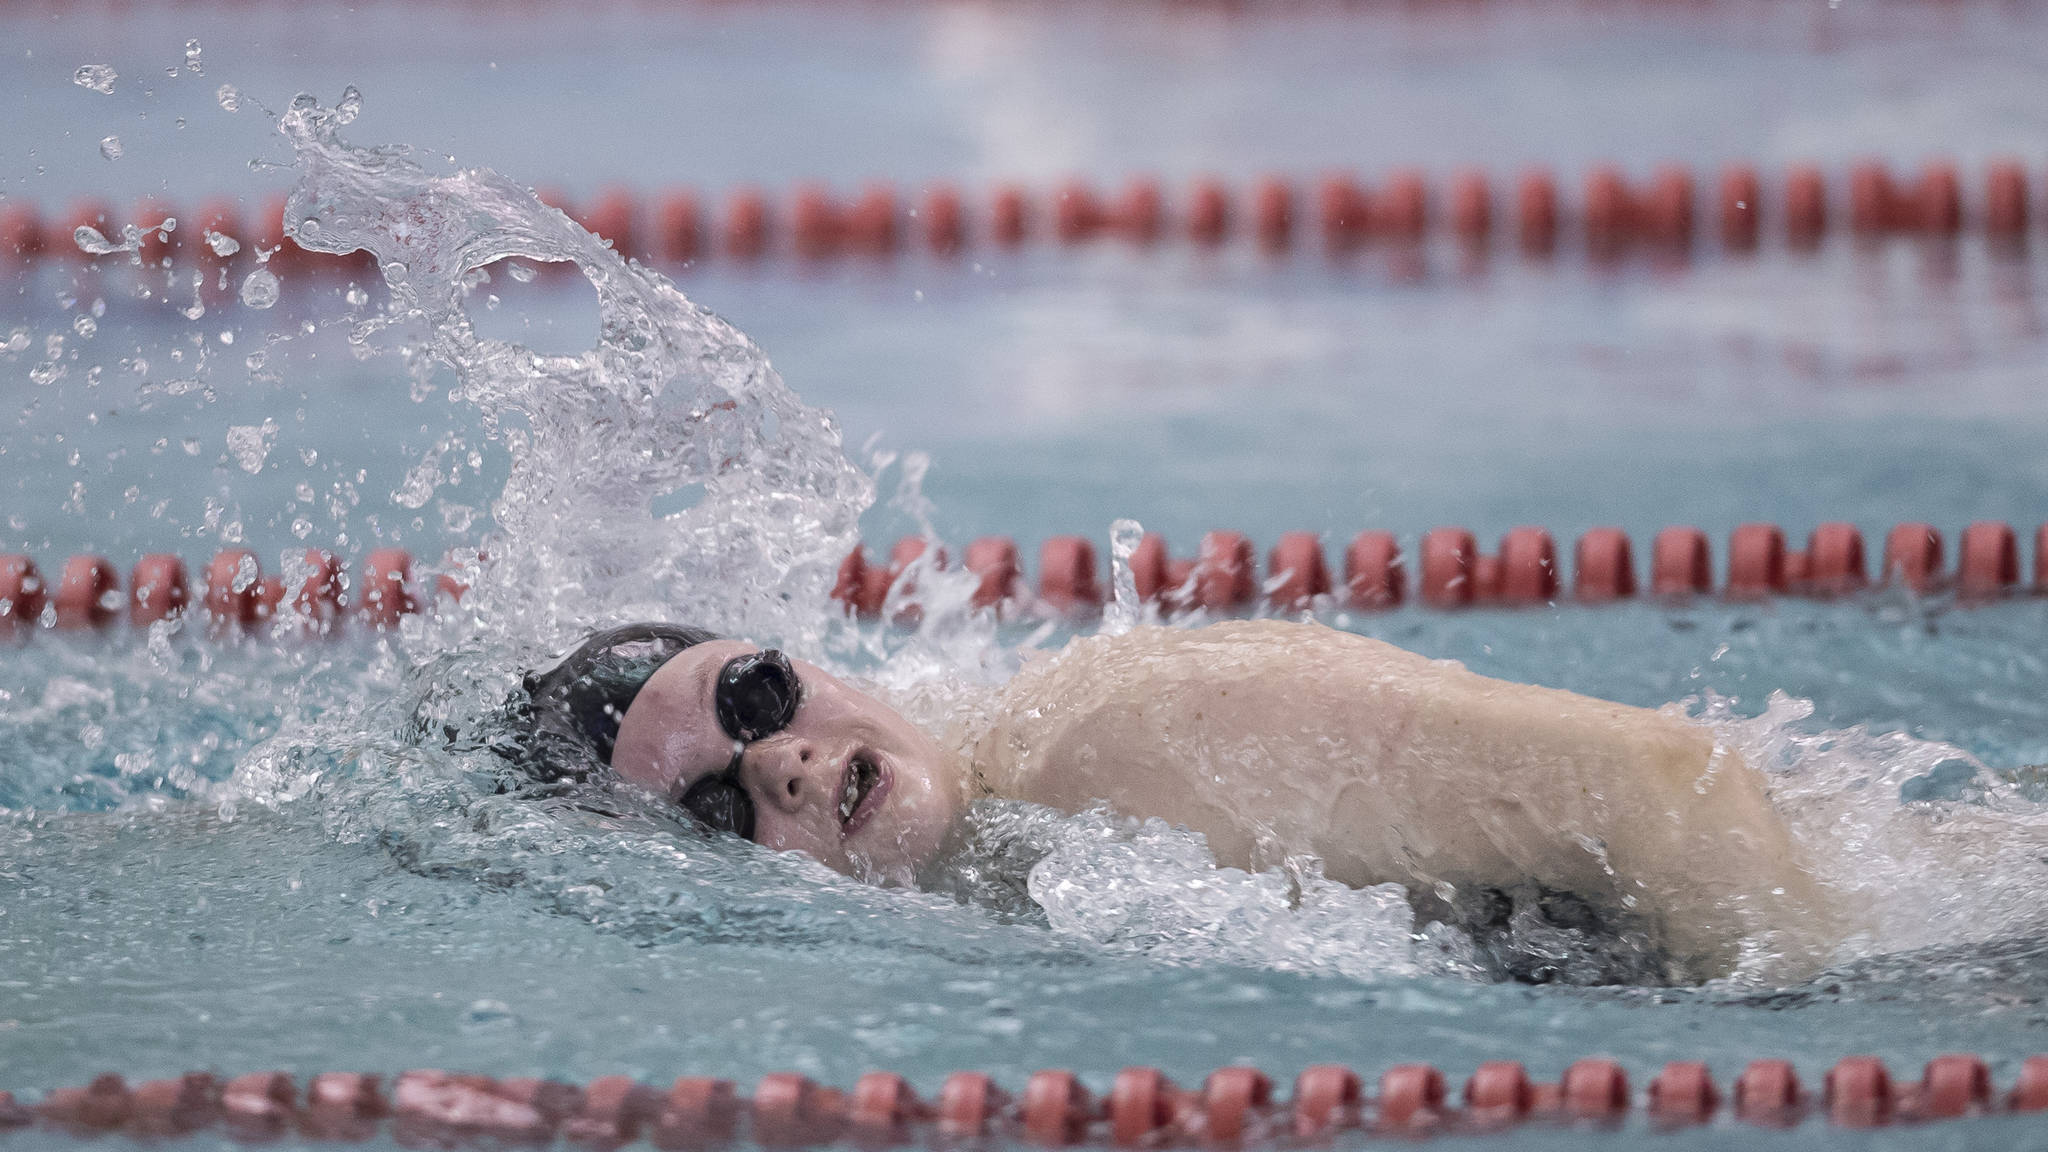 Juneau-Douglas High School junior Cameron Howard swims in the girls 200-yard freestyle preliminary at the Southeast Alaska Regional Swim and Dive Championships. Howard qualified for three events at this weekend’s ASAA/First National Bank Alaska Swim and Dive State Championships in Anchorage.